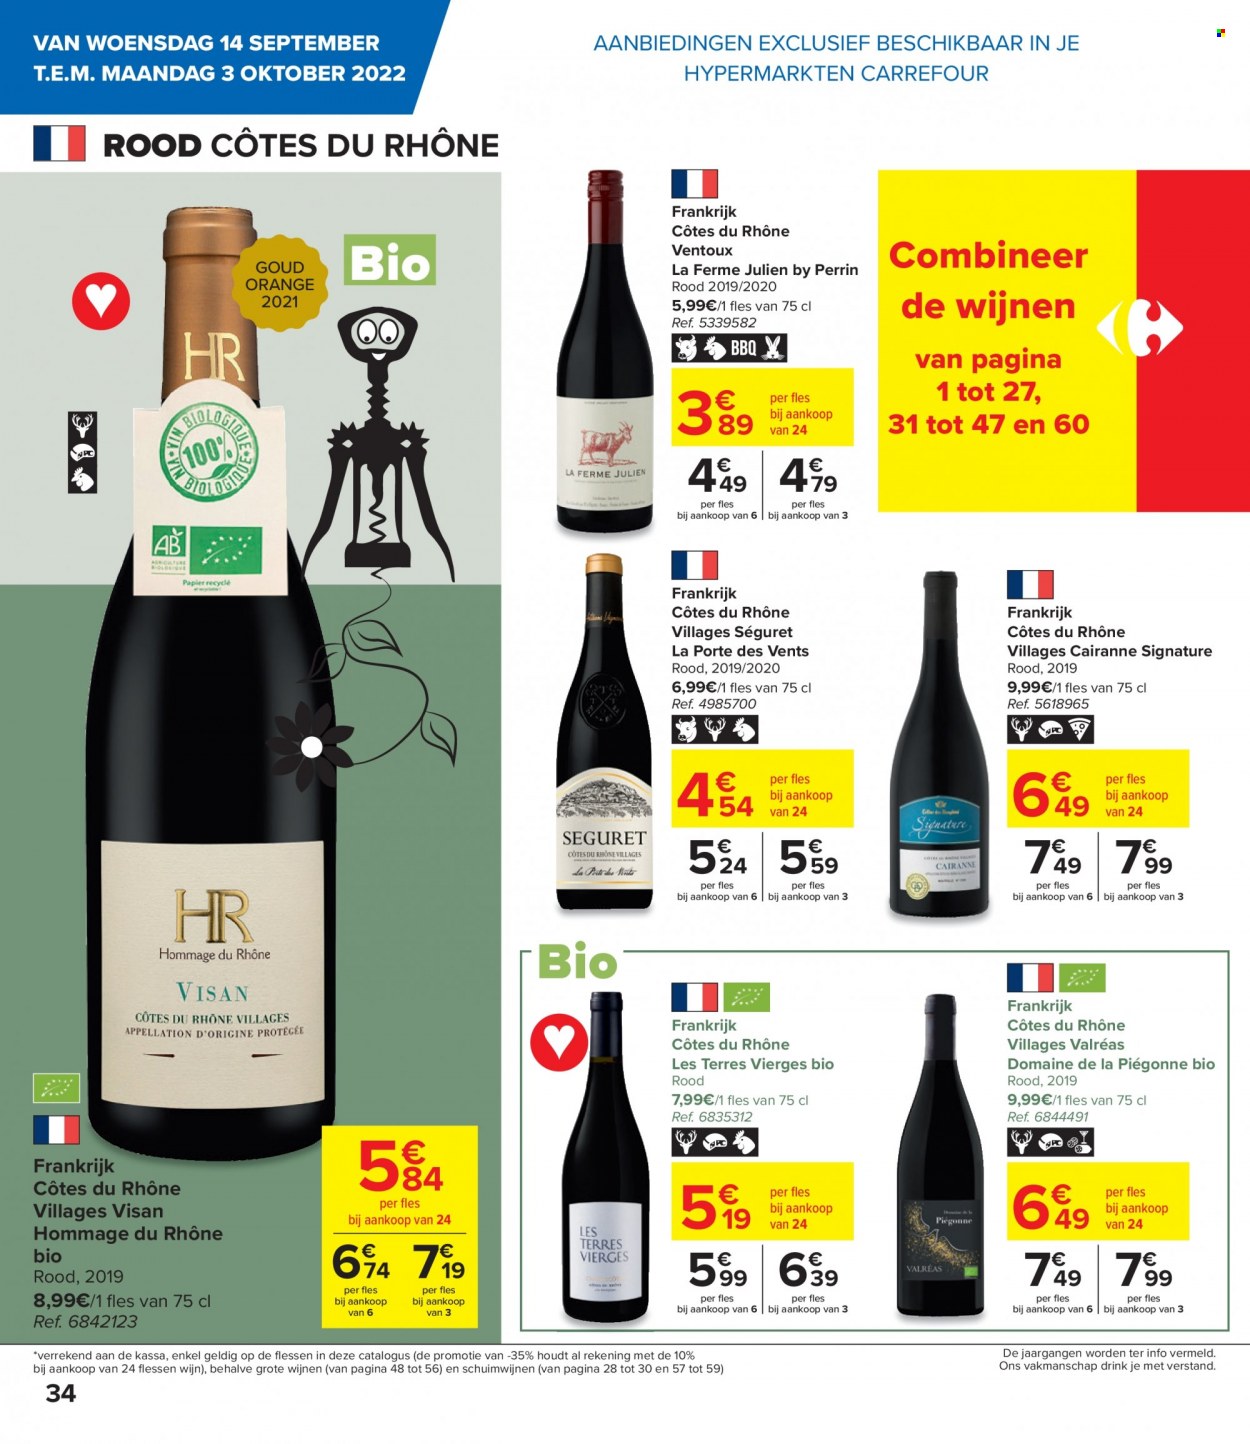 Catalogue Carrefour hypermarkt - 14.9.2022 - 3.10.2022. Page 4.